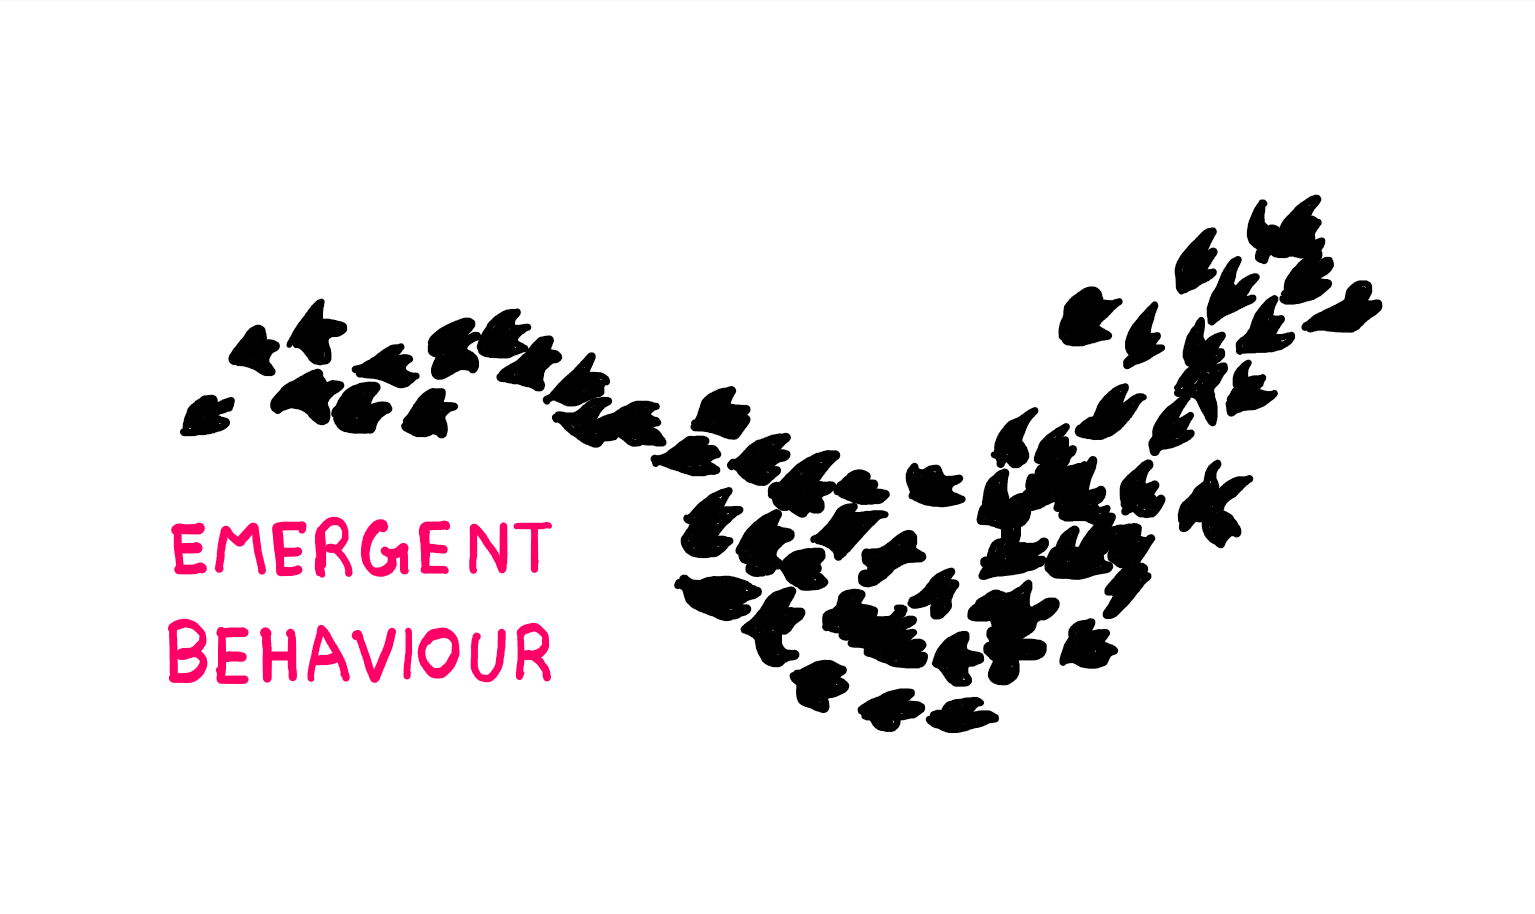 The Mind-Blowing World of Emergent Behaviour - An illustration showing a flock of birds dancing like a living creature through the sky. Besides this flock, the following text is highlighted: "Emergent Behaviour".